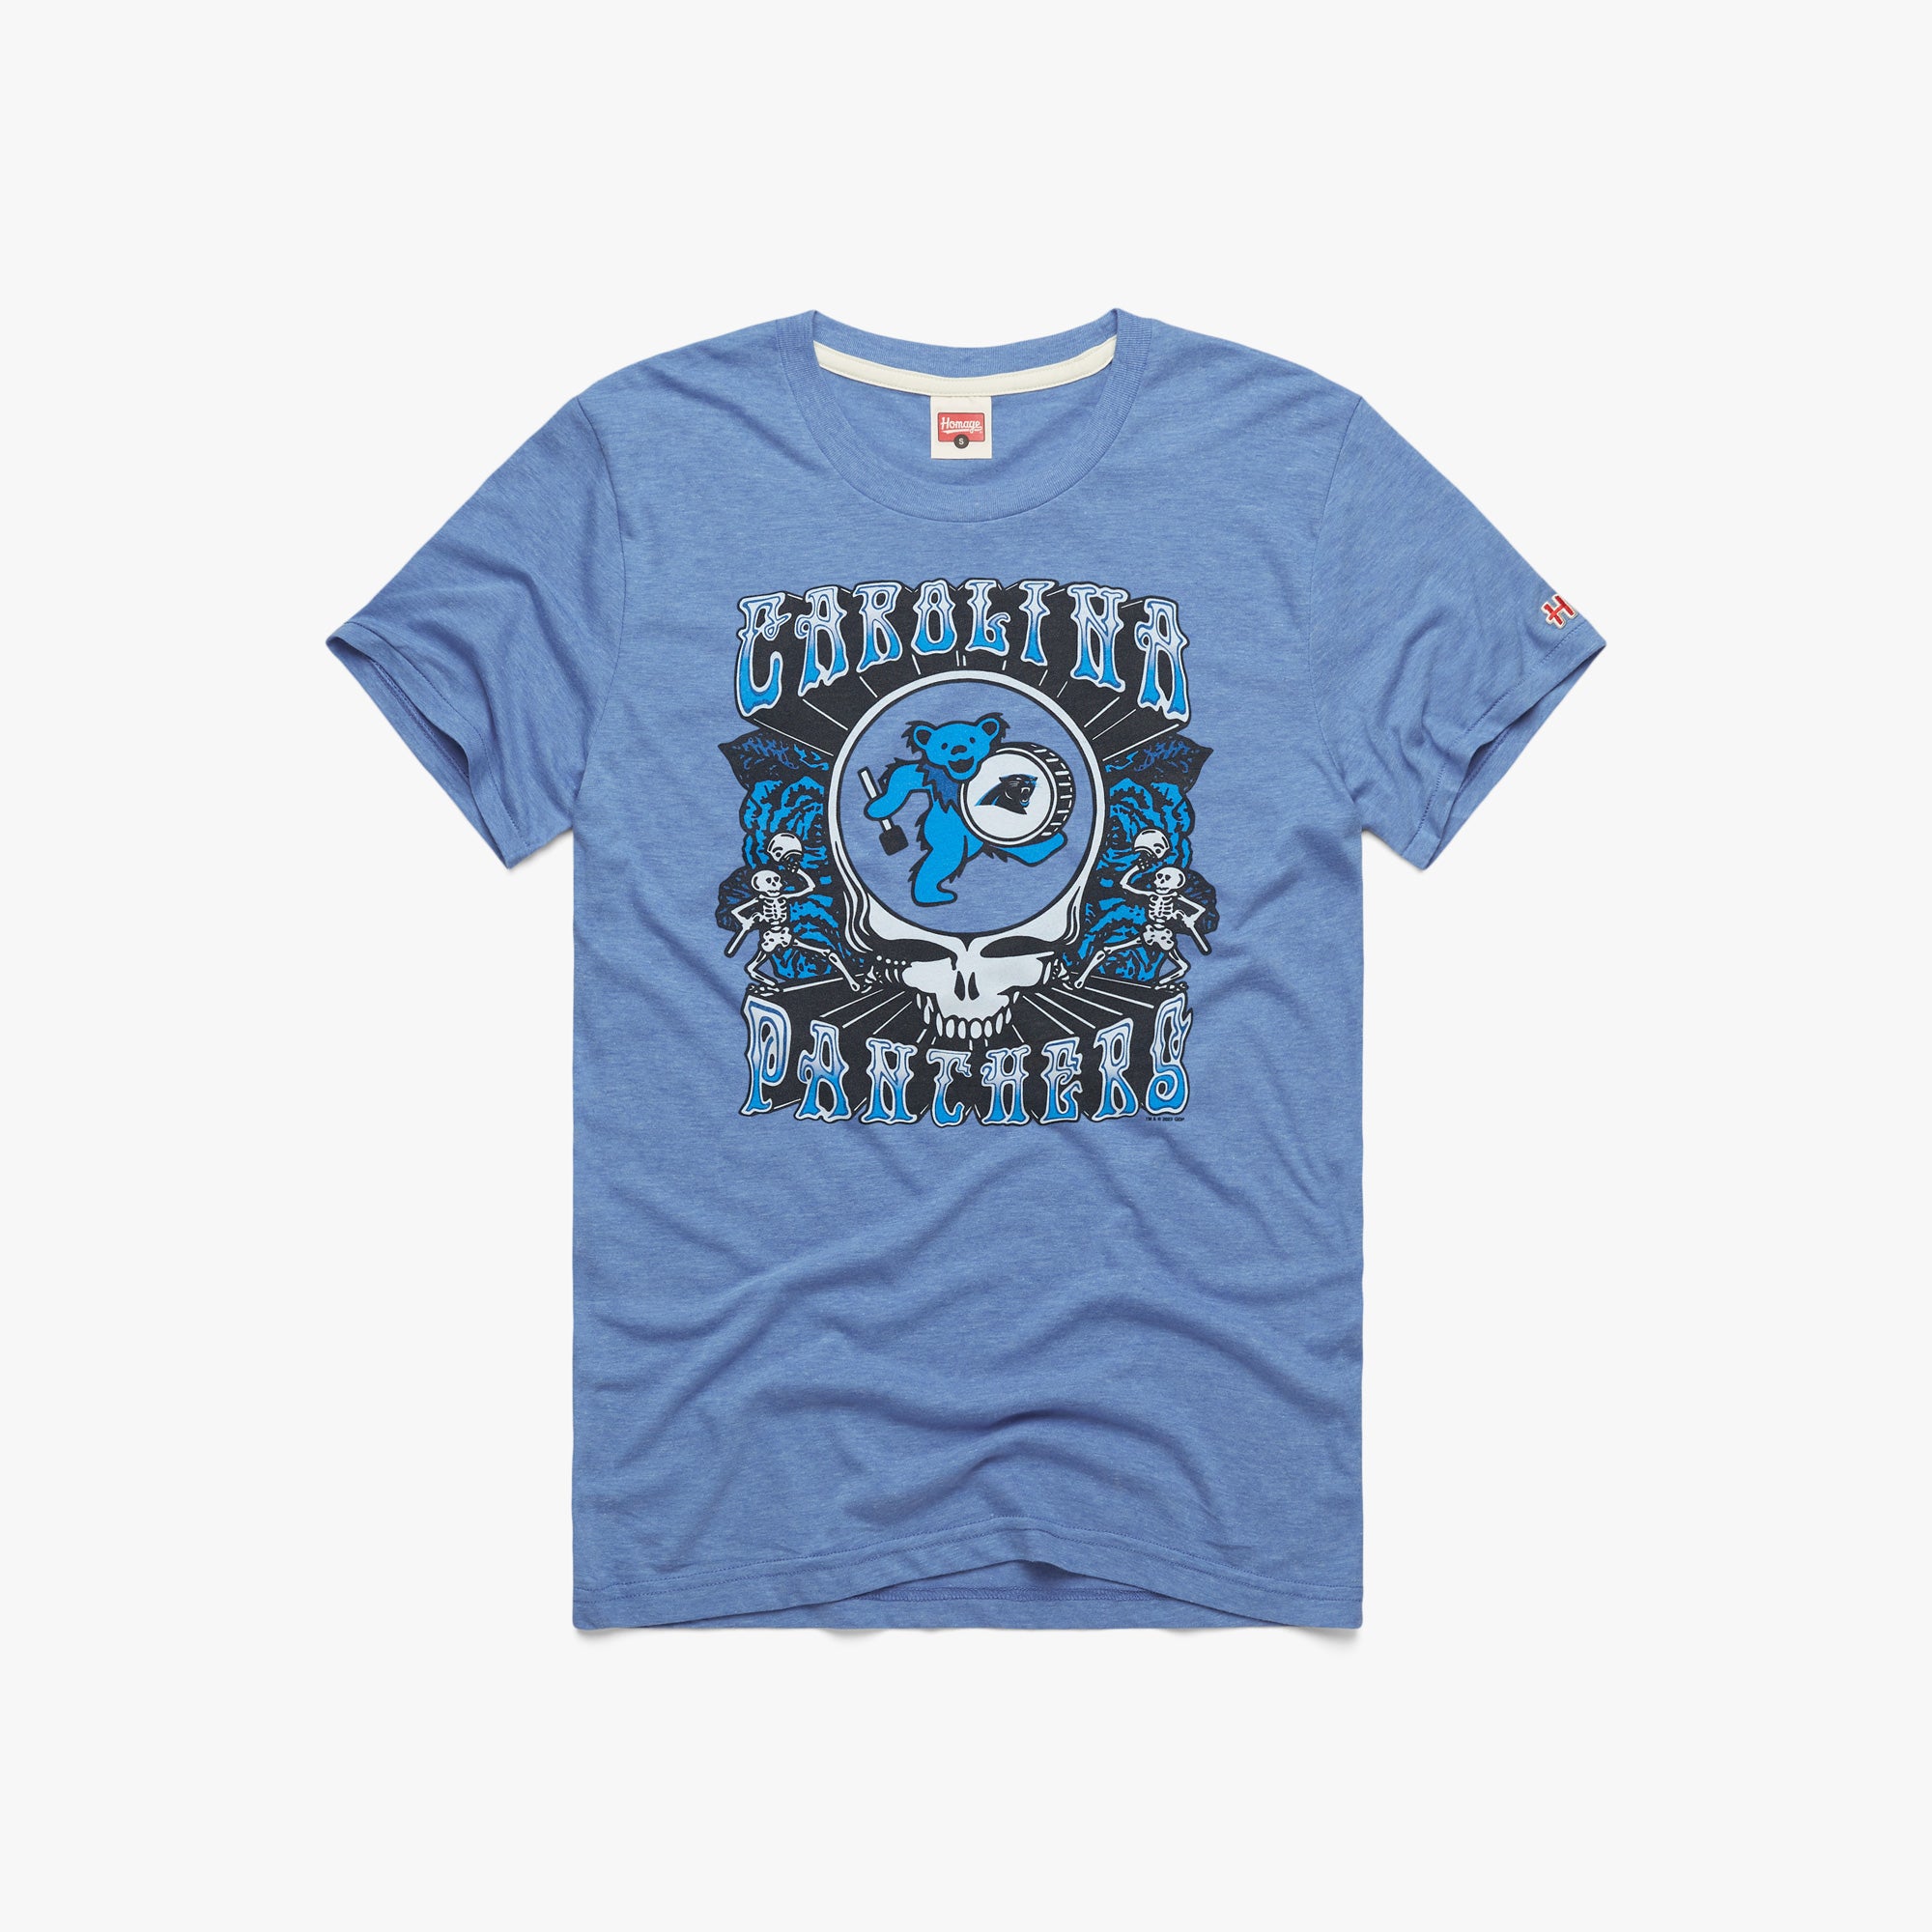 NFL x Grateful Dead x Carolina Panthers T-Shirt from Homage. | Officially Licensed Vintage NFL Apparel from Homage Pro Shop.